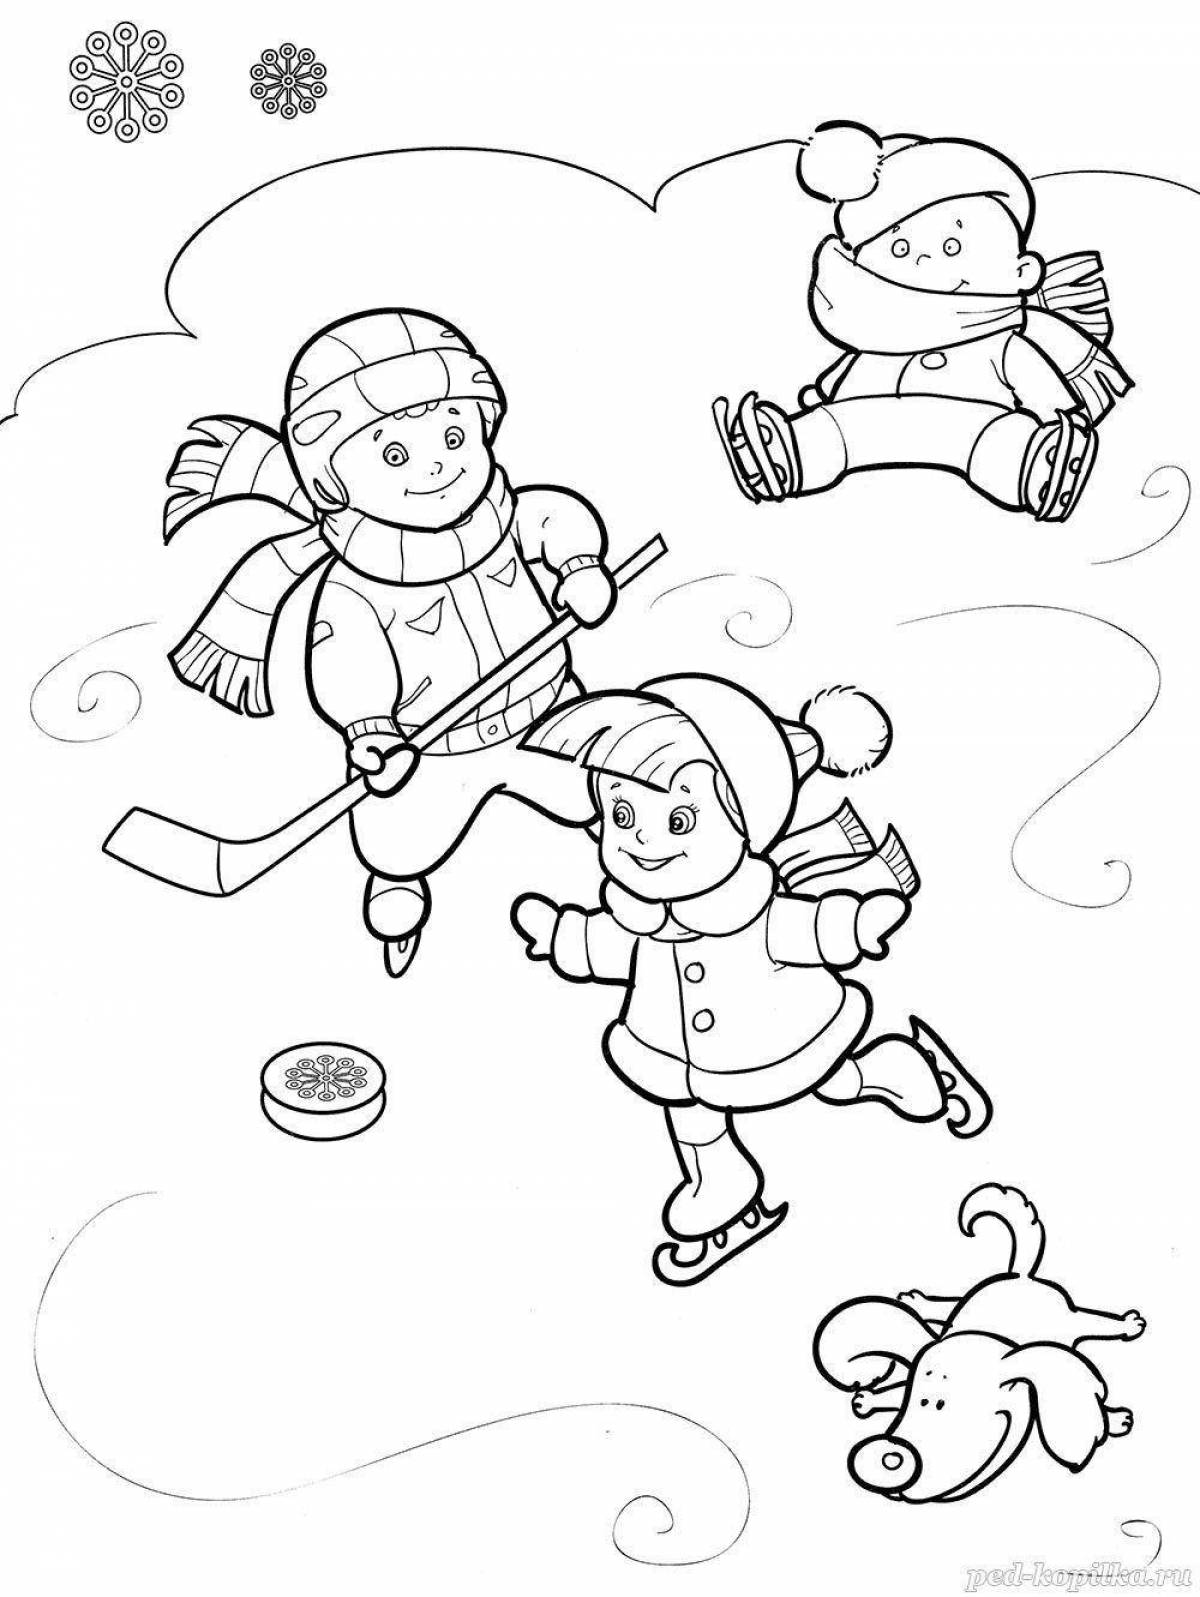 Adorable winter sports coloring page